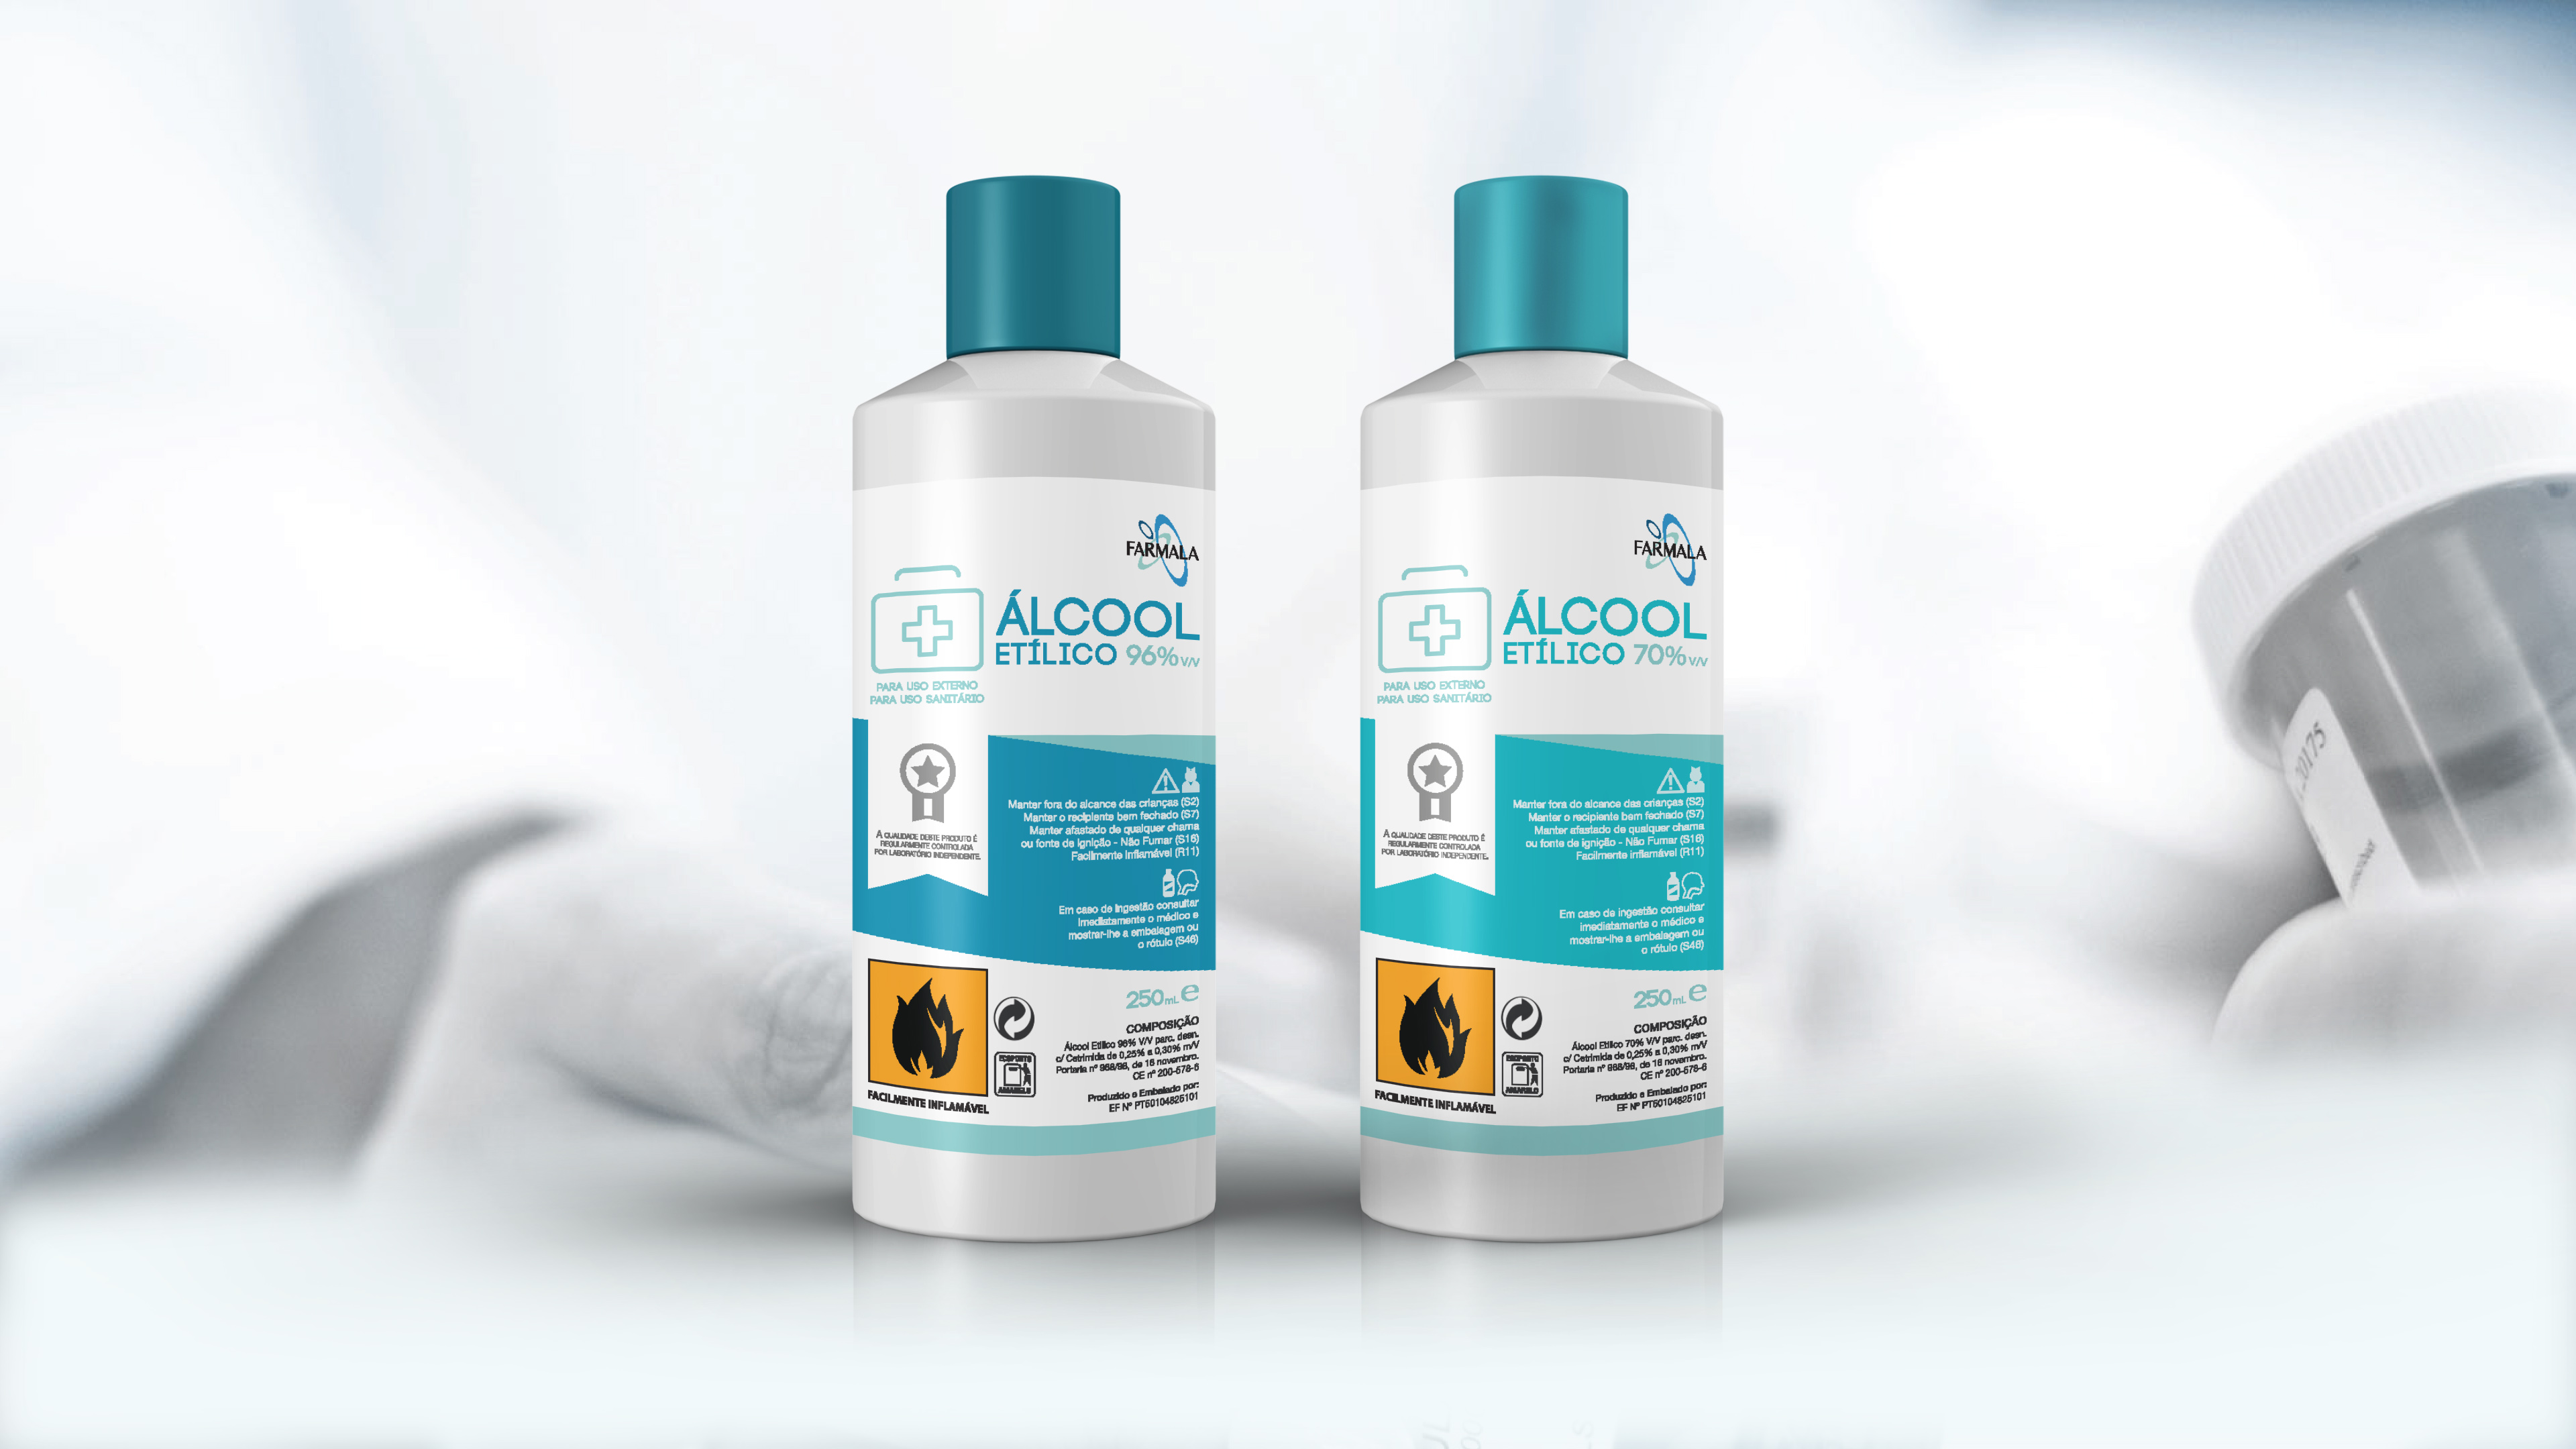 packaging and branding of a rubbing alcohol product label - pack shot